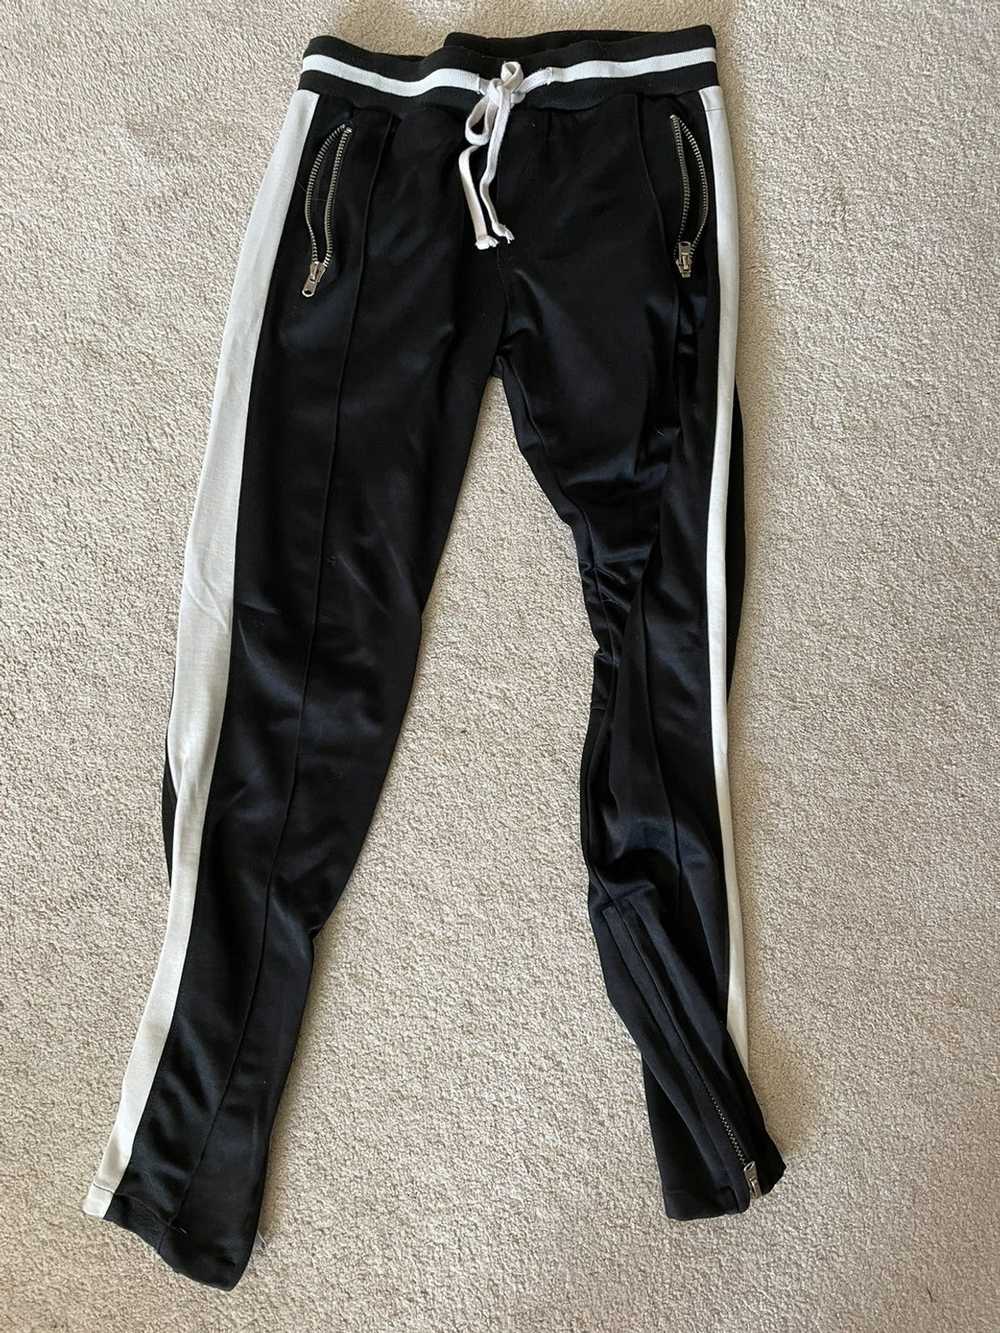 mnml mnml track pants used and has a small hole